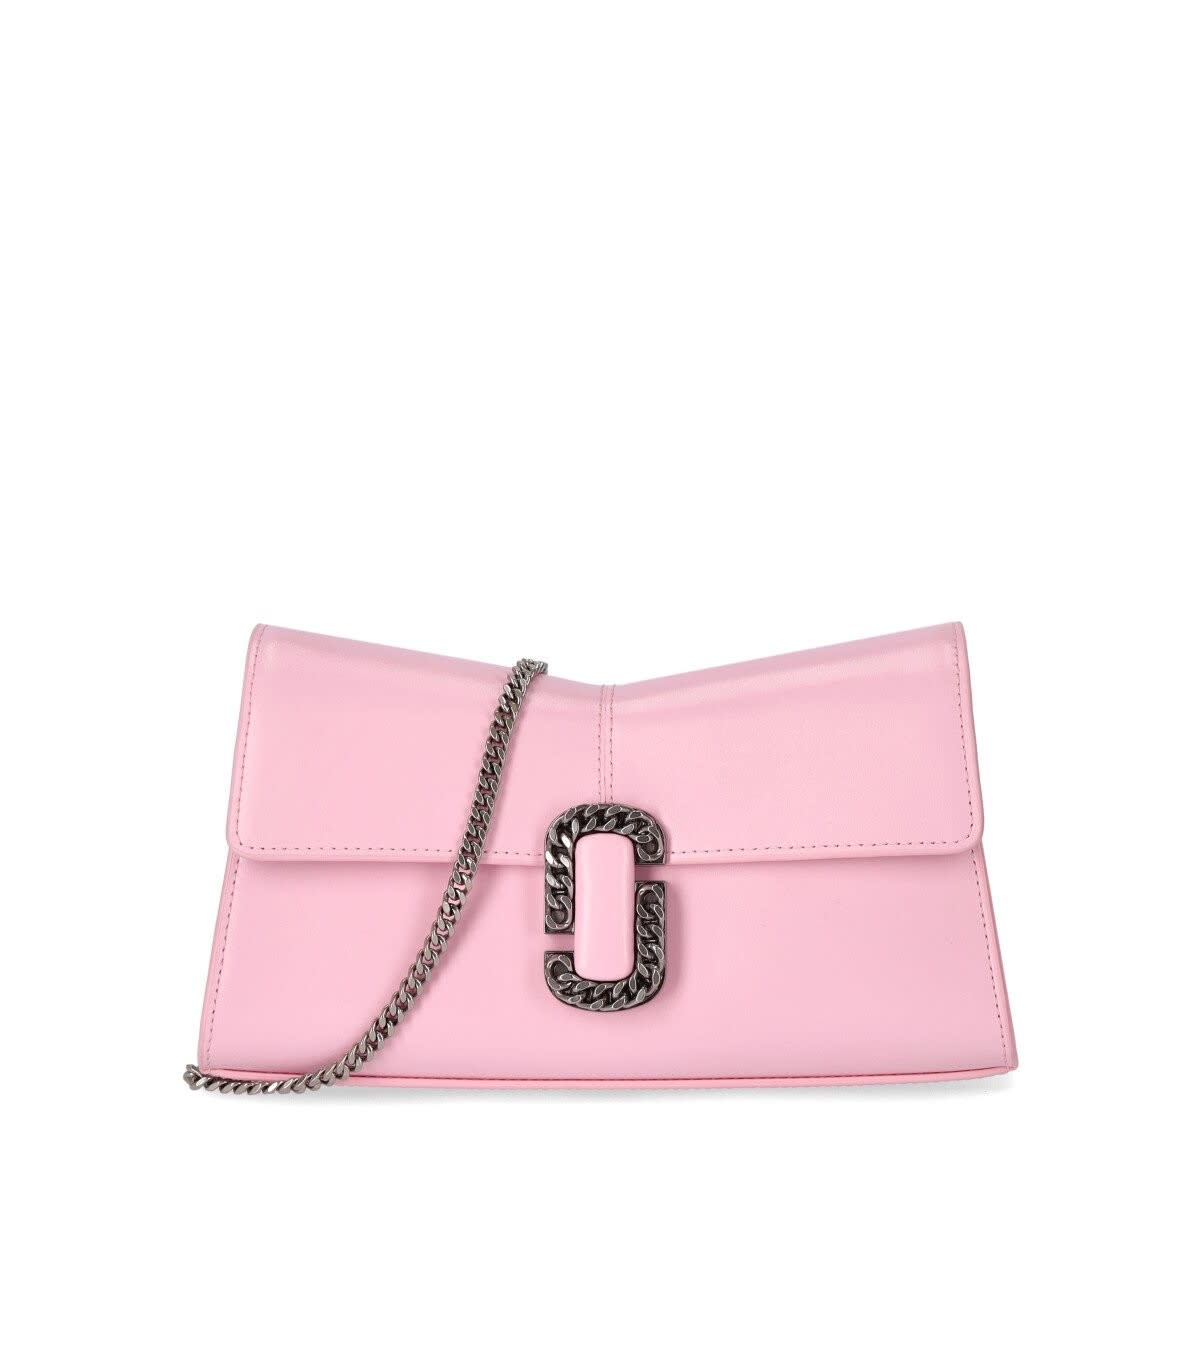 MARC JACOBS PINK LEATHER CLUTCH